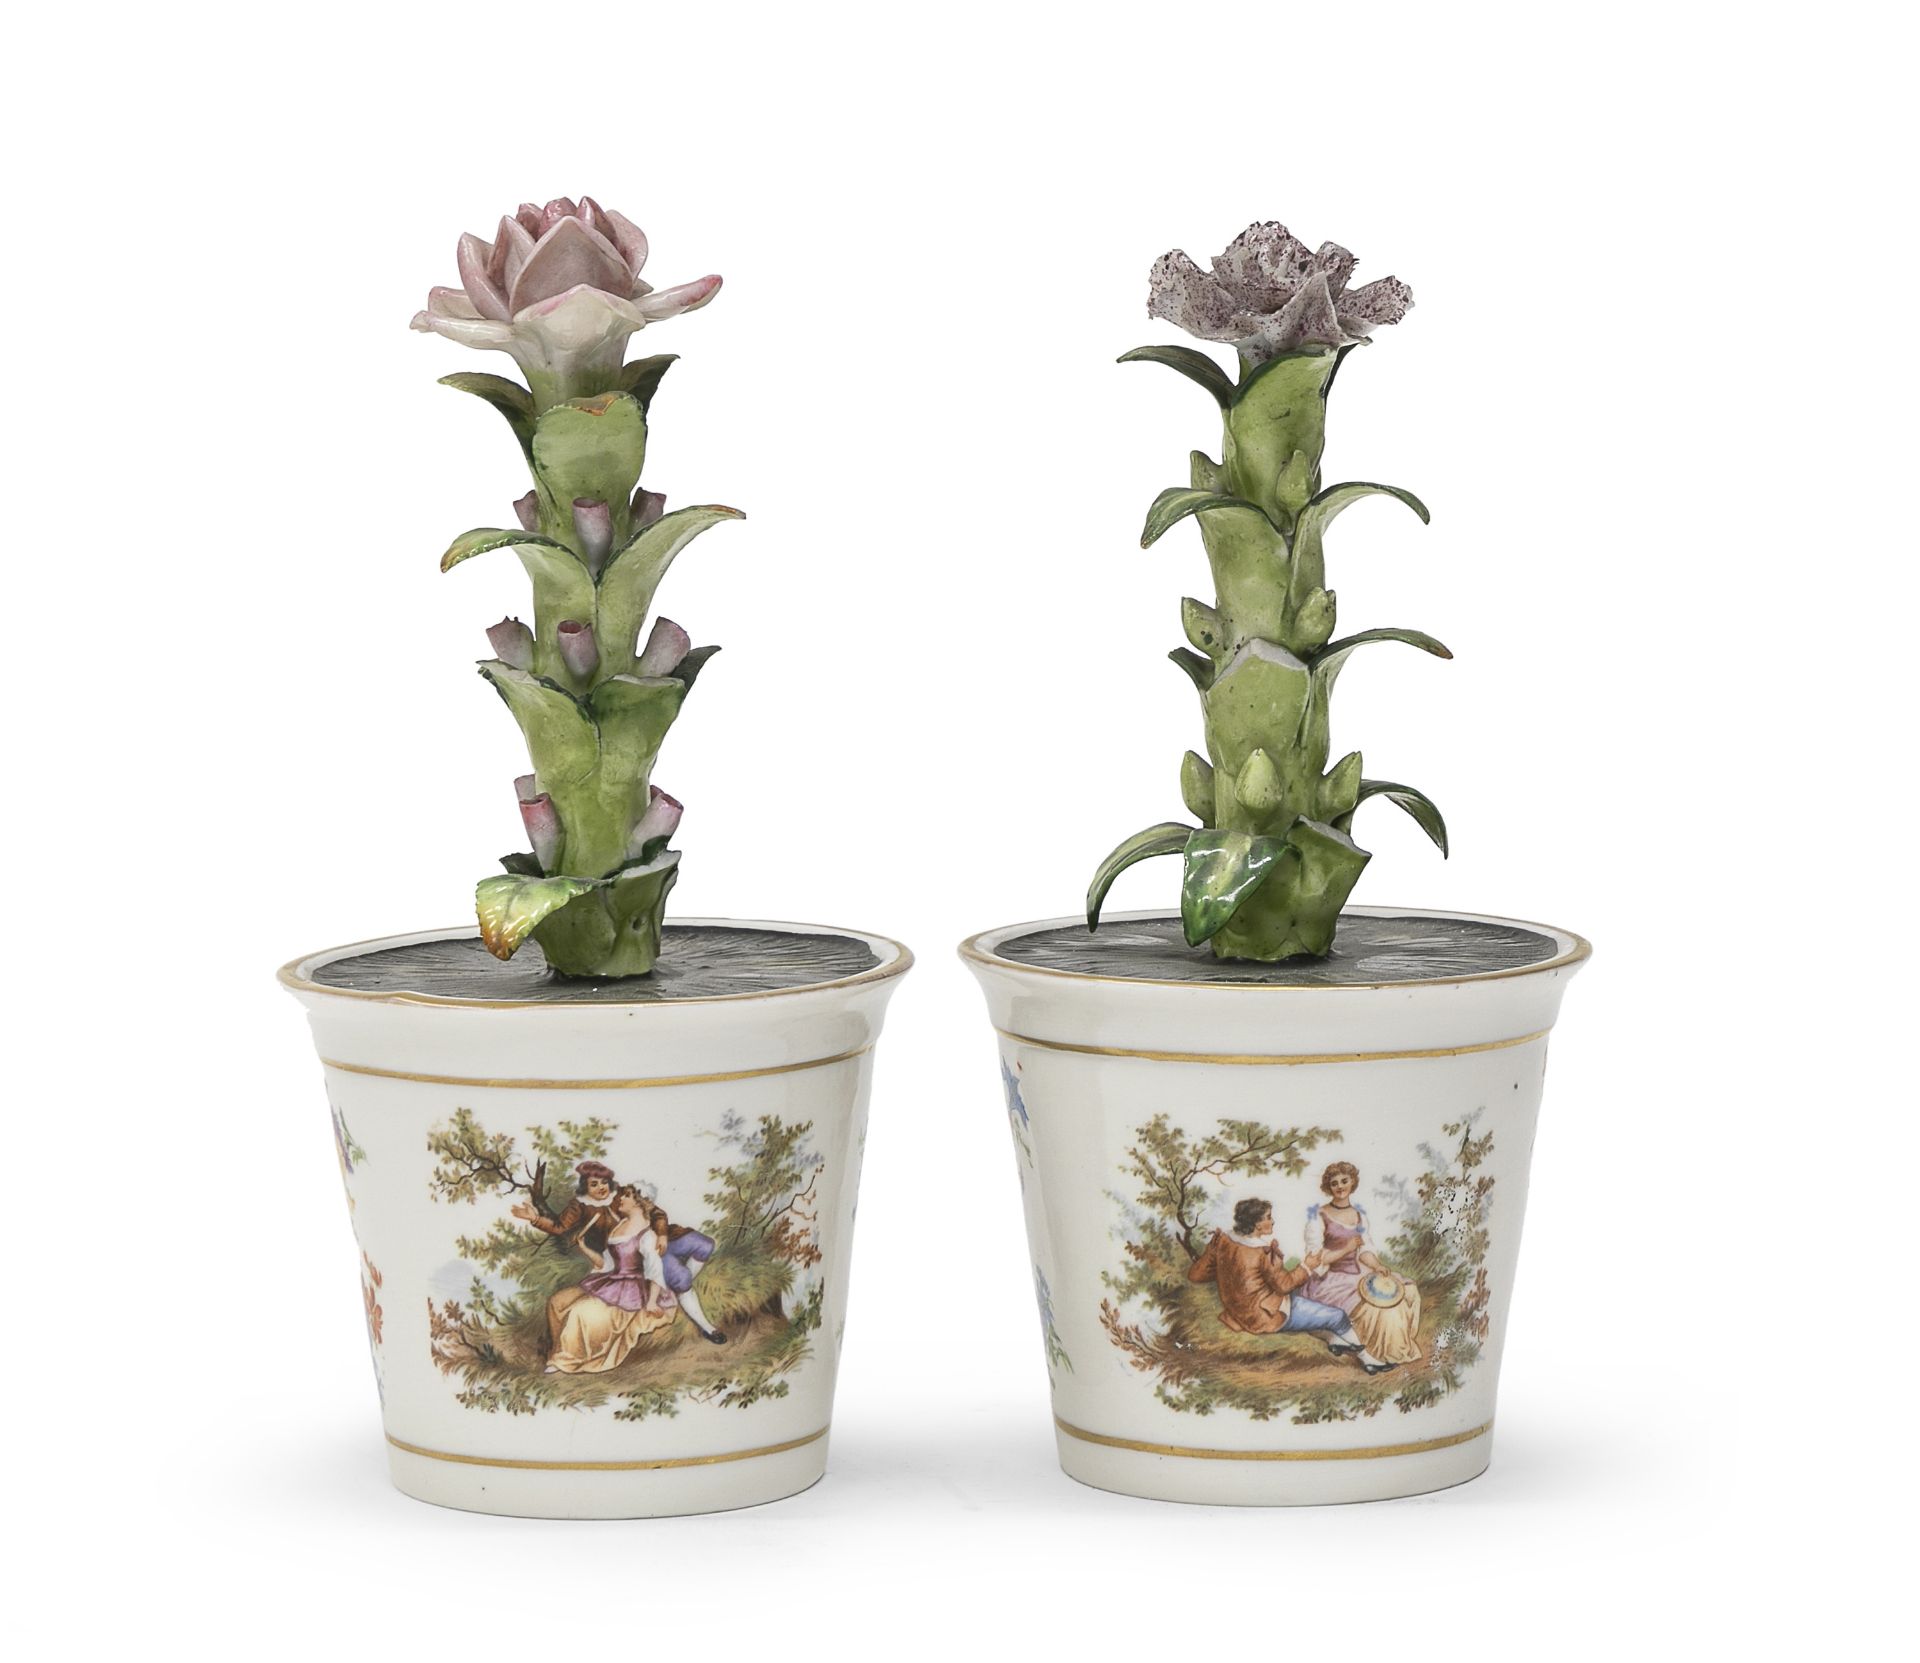 PAIR OF PORCELAIN VASES GINORI END OF THE 19TH CENTURY